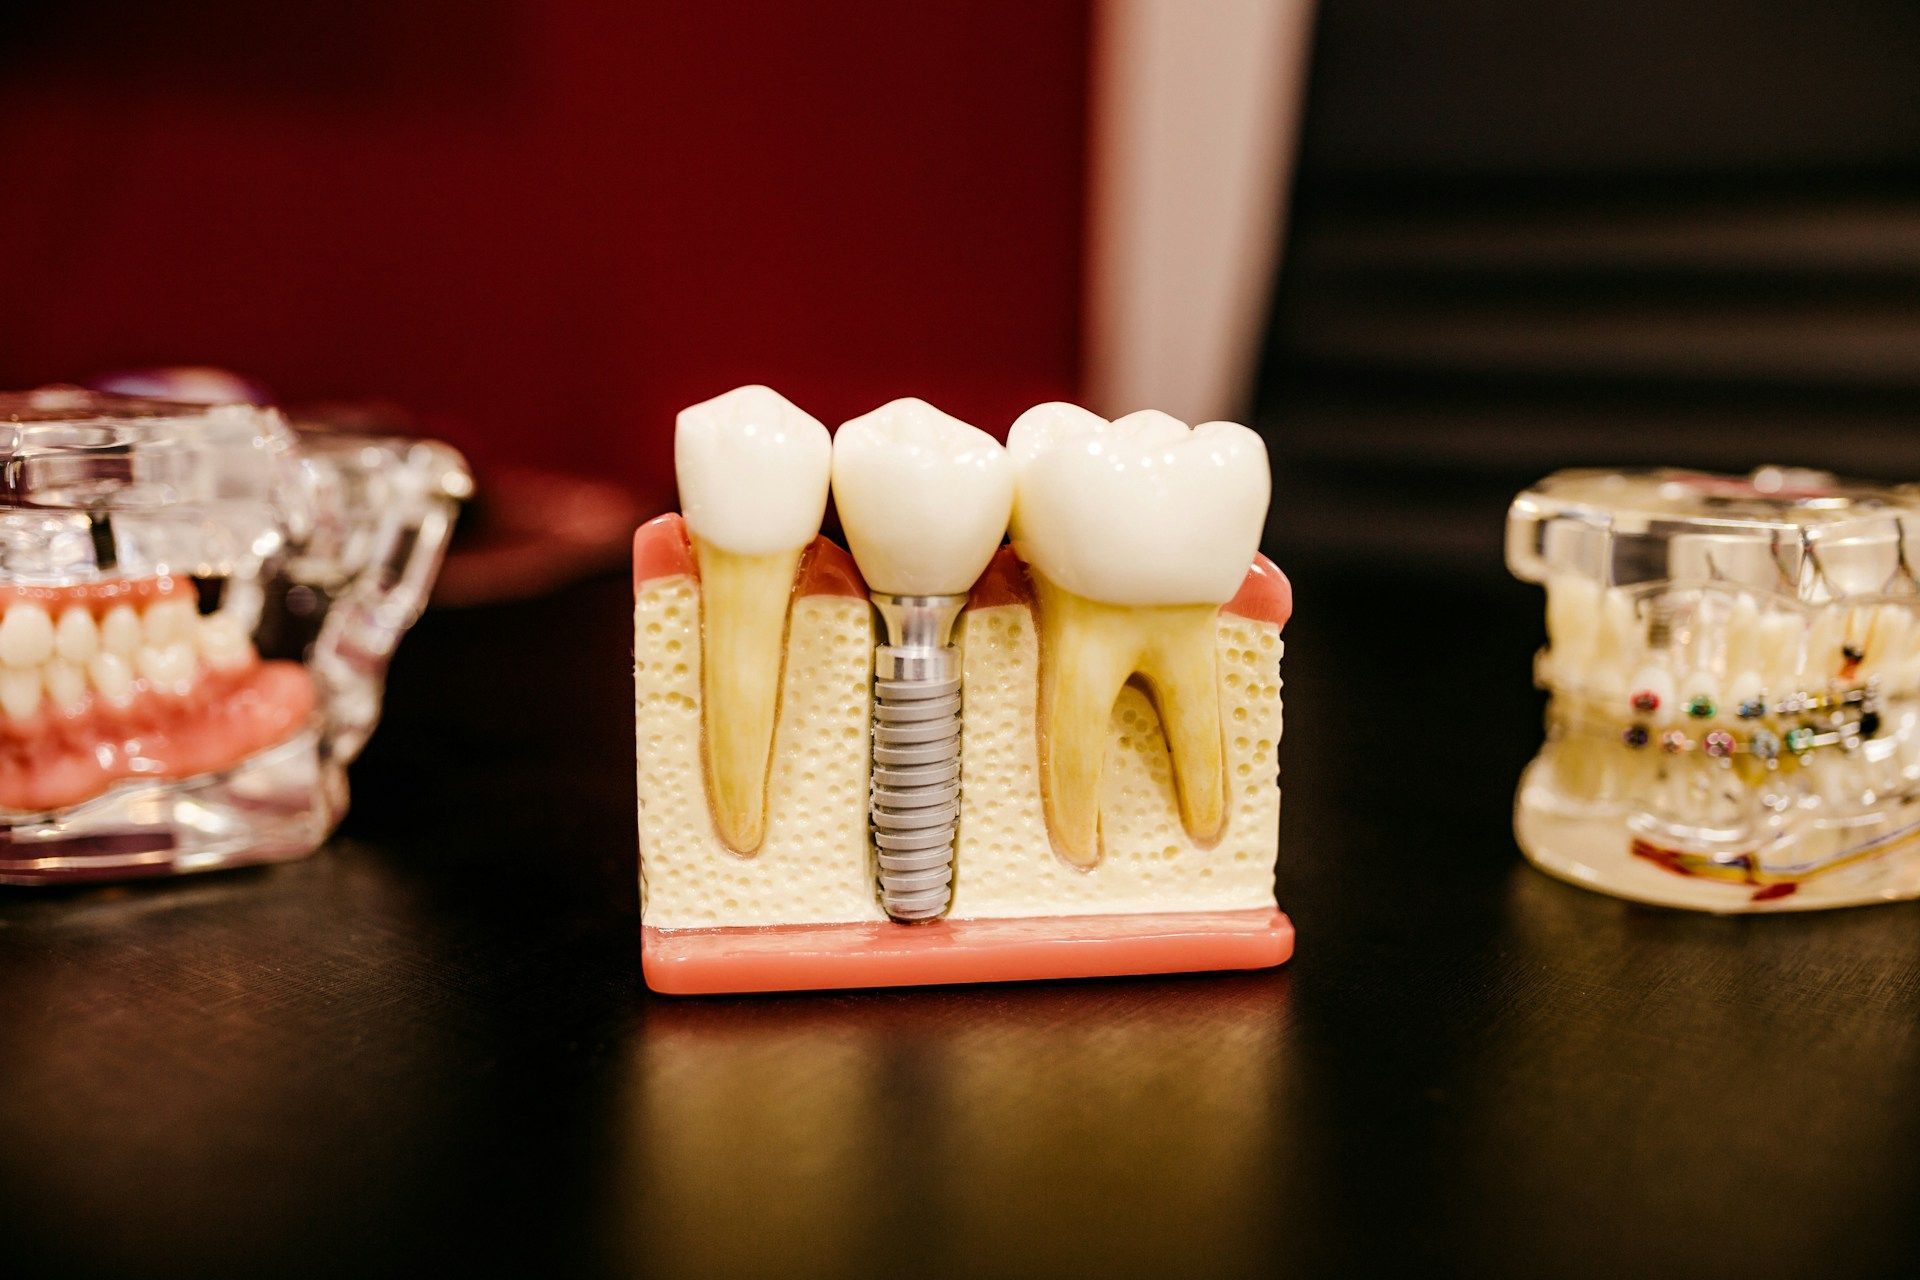 A model of a dental implant is sitting on a table next to other models of teeth.